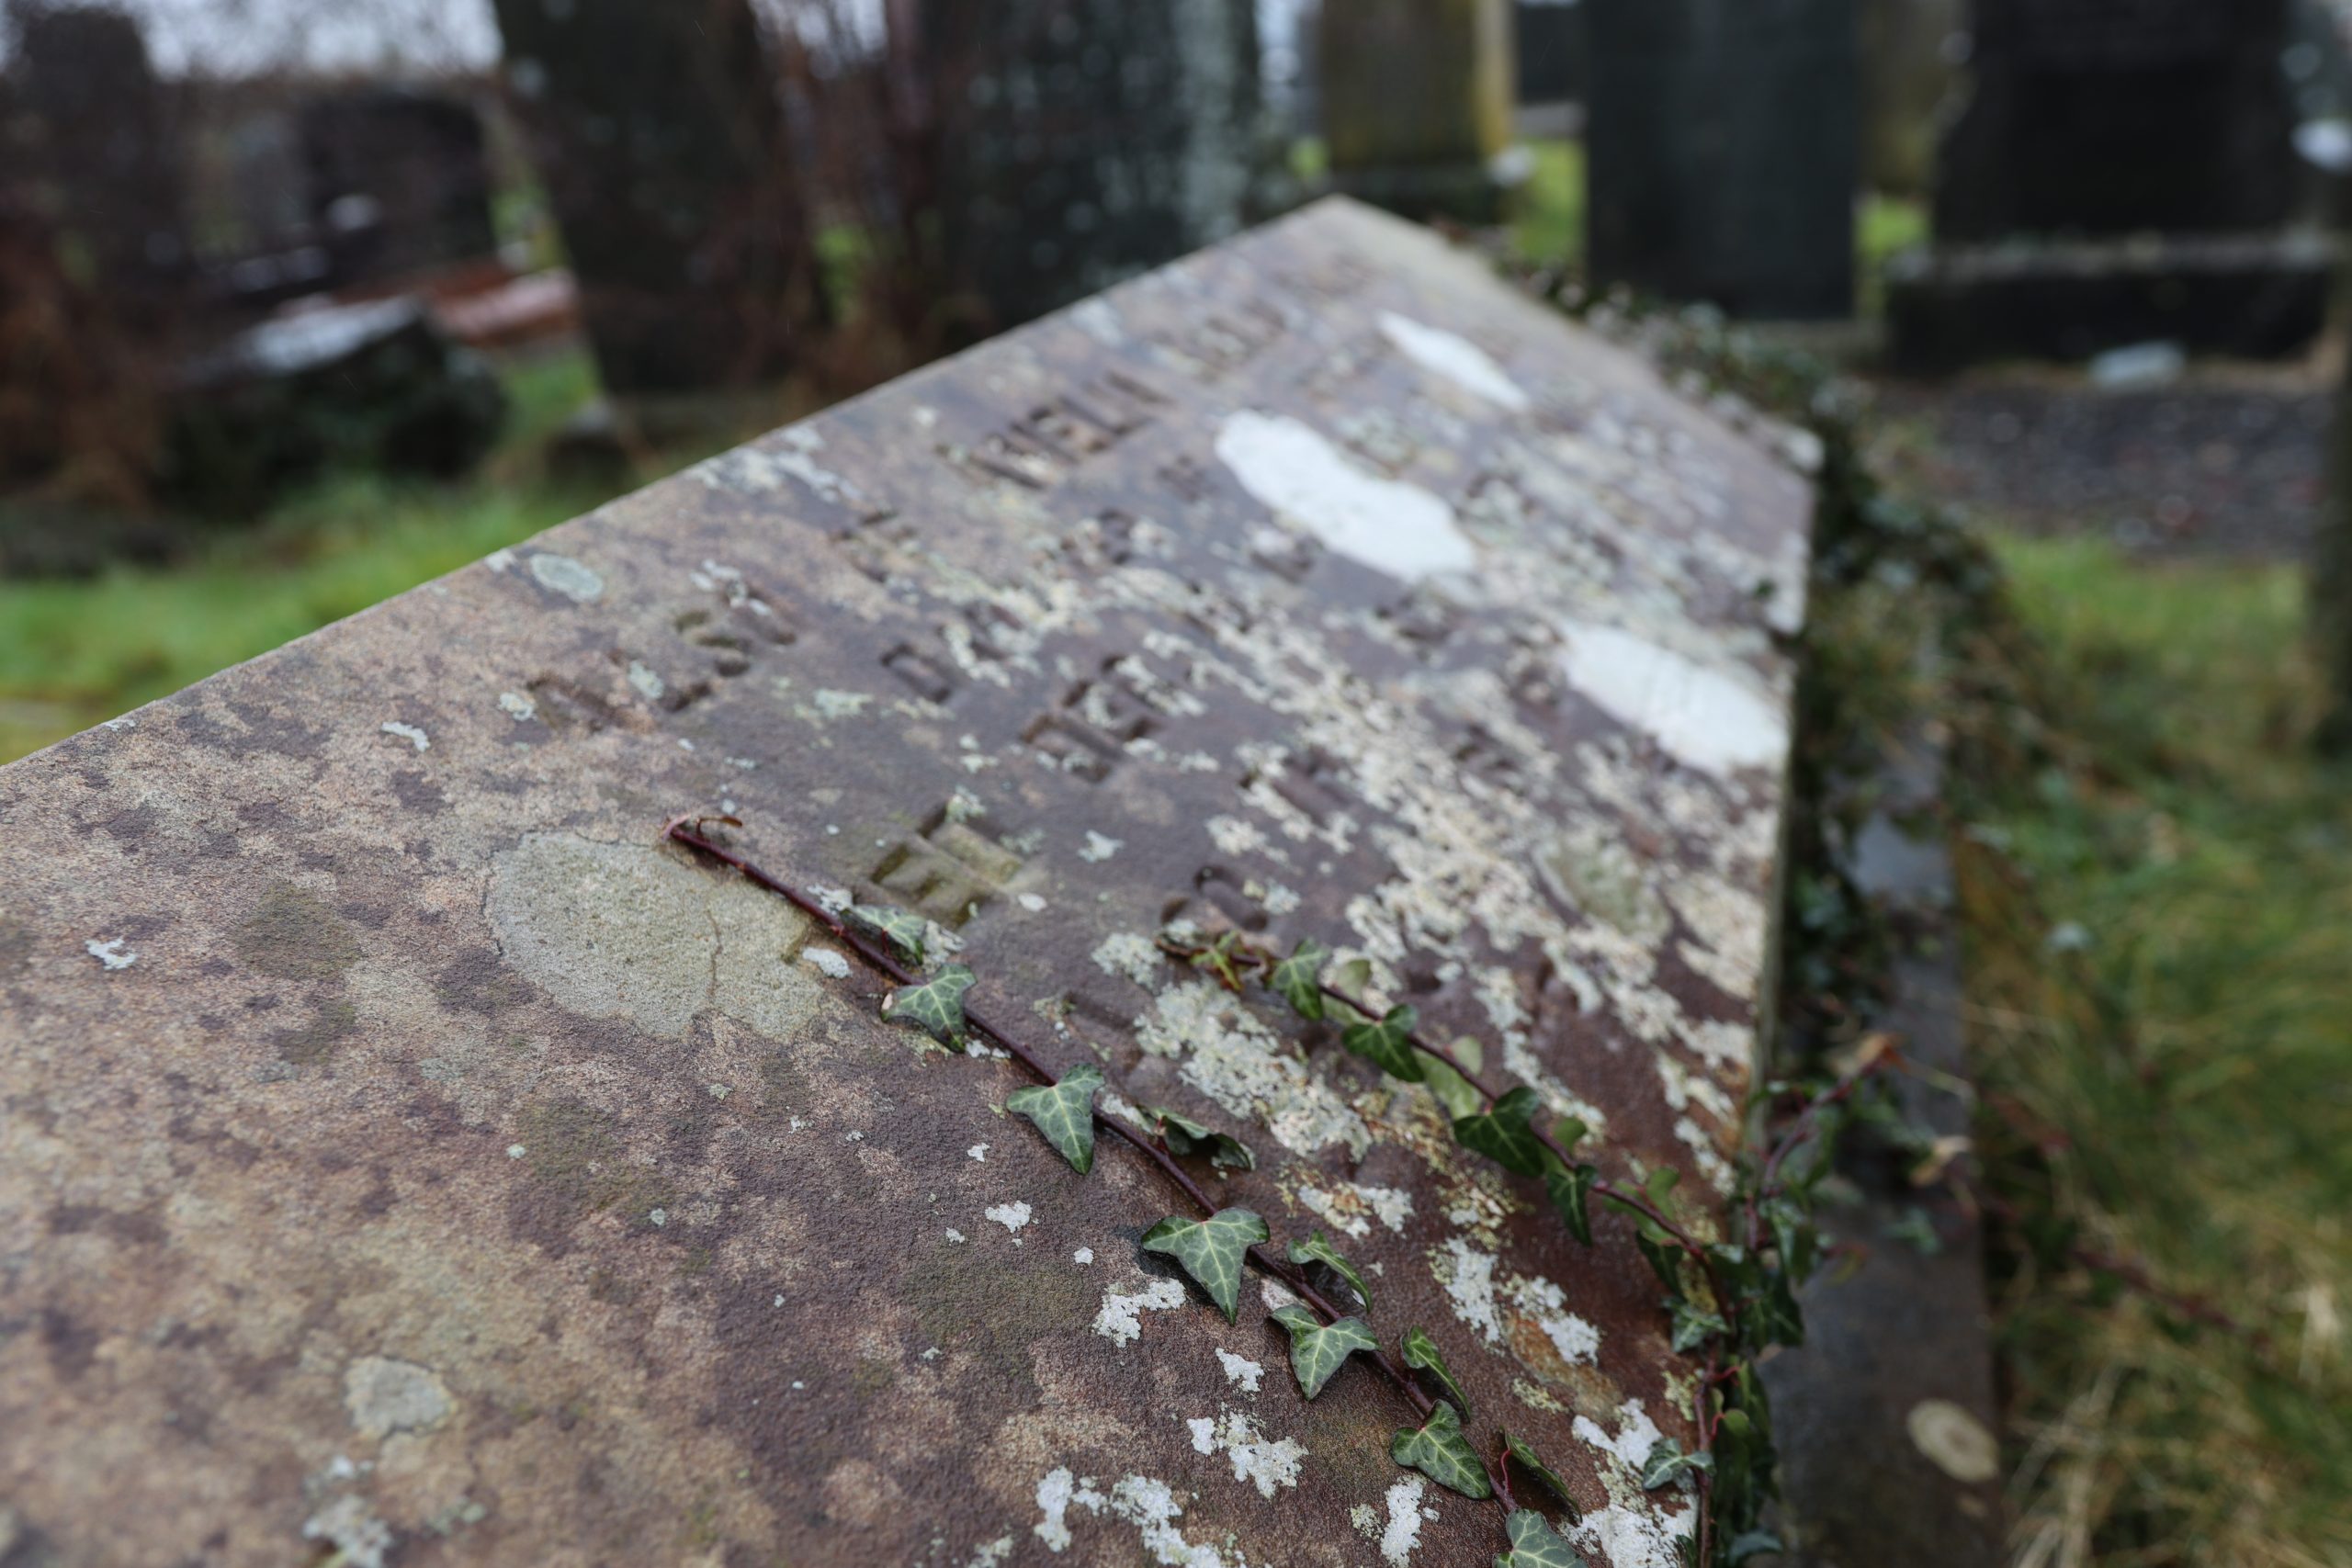 Ivy grows up the gravestone for Amelia Buksh, with spots of lichen and other erosion. Trees in the back left.